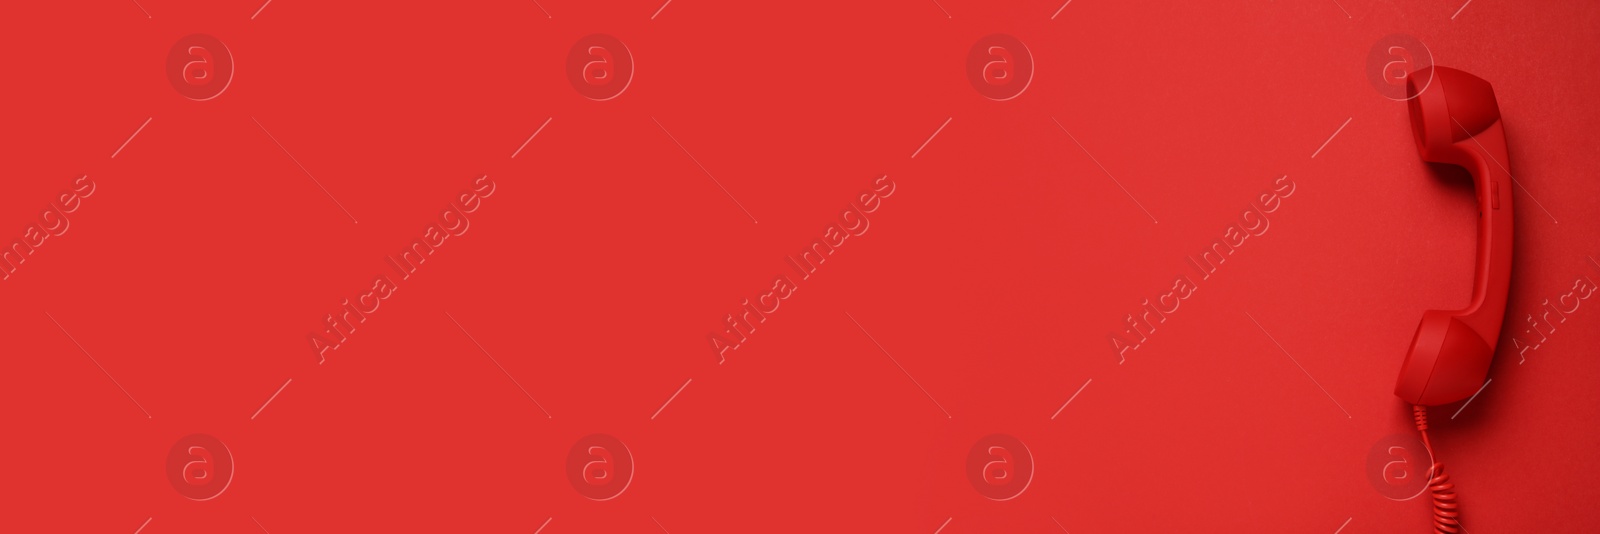 Image of Hotline service. Red telephone receiver and space for text on red background, top view